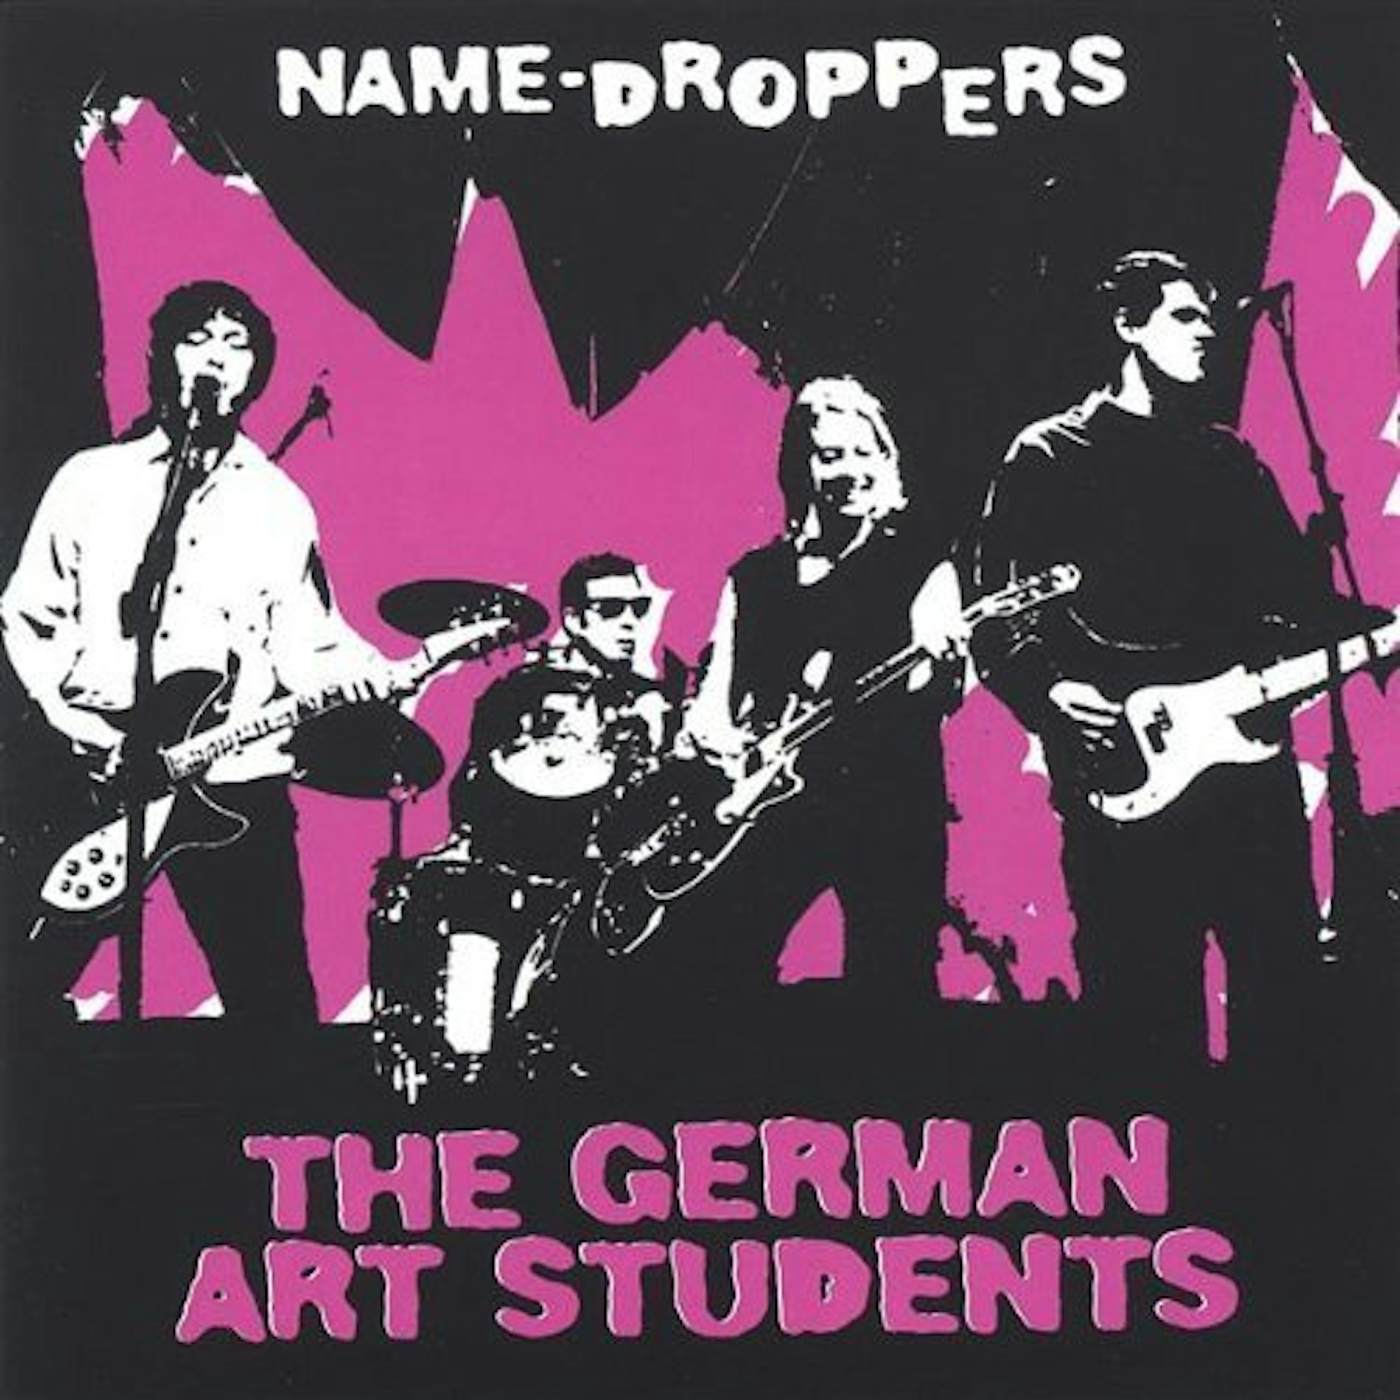 The German Art Students NAME-DROPPERS CD